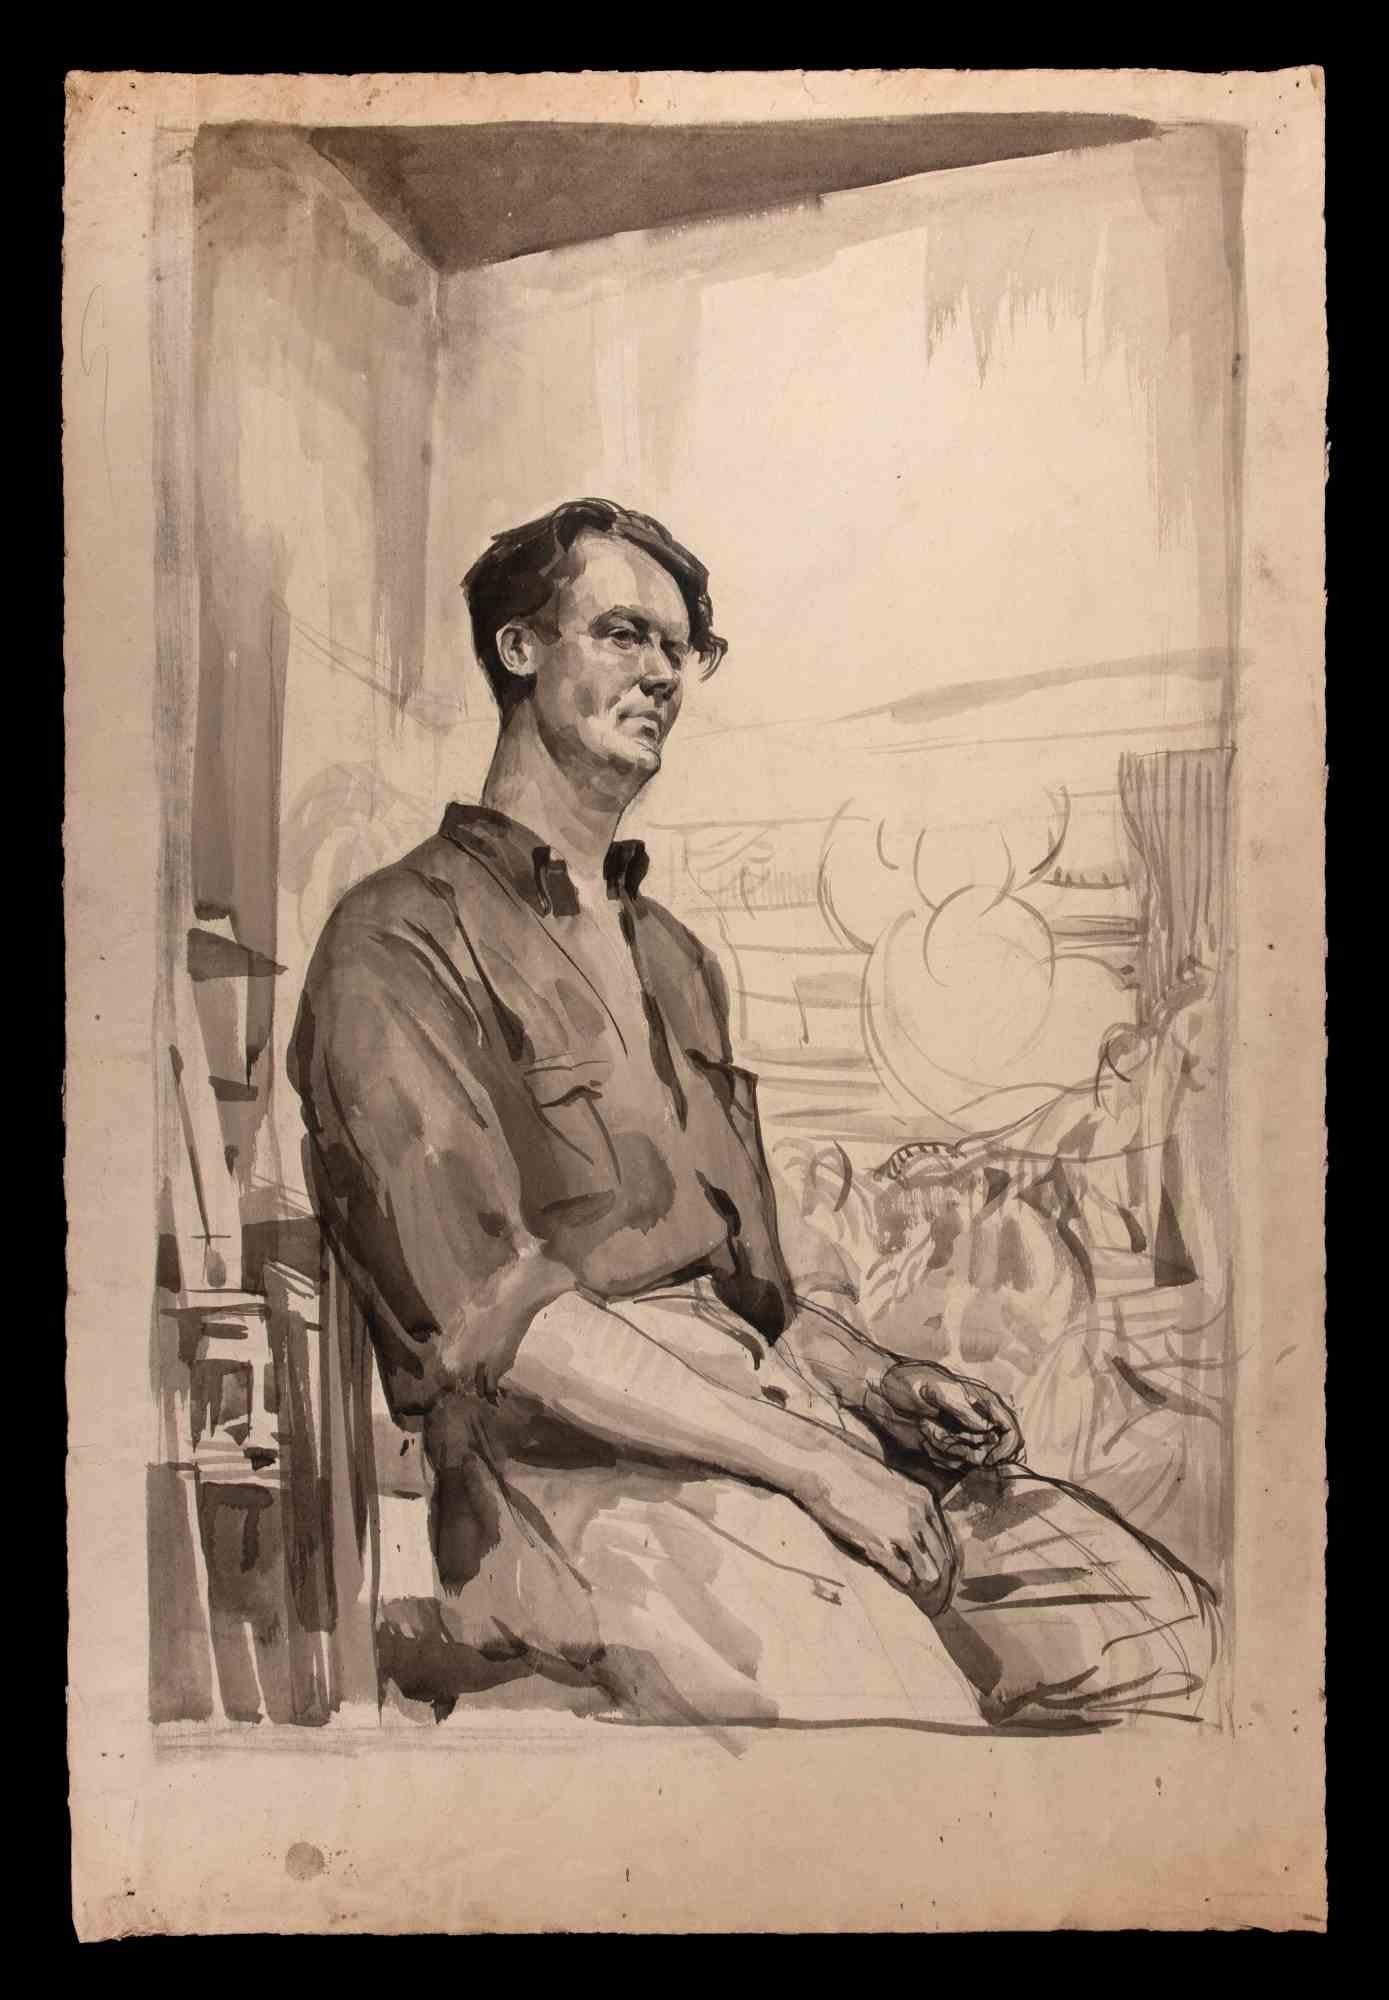 Portrait of Man - Original Drawing - Early 20th Century